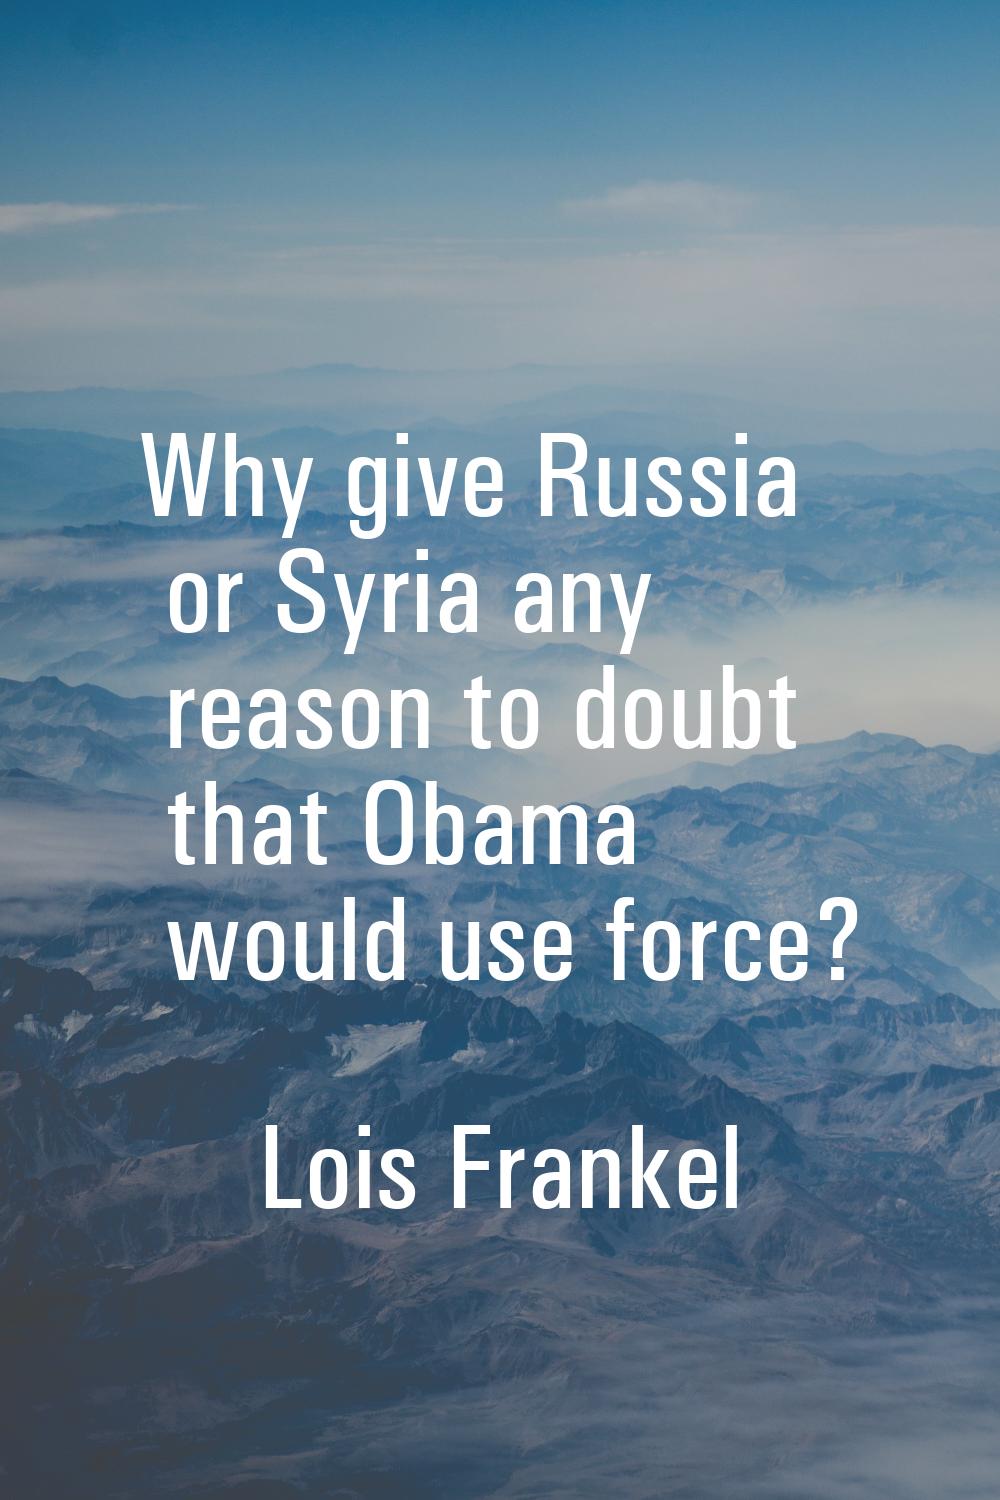 Why give Russia or Syria any reason to doubt that Obama would use force?